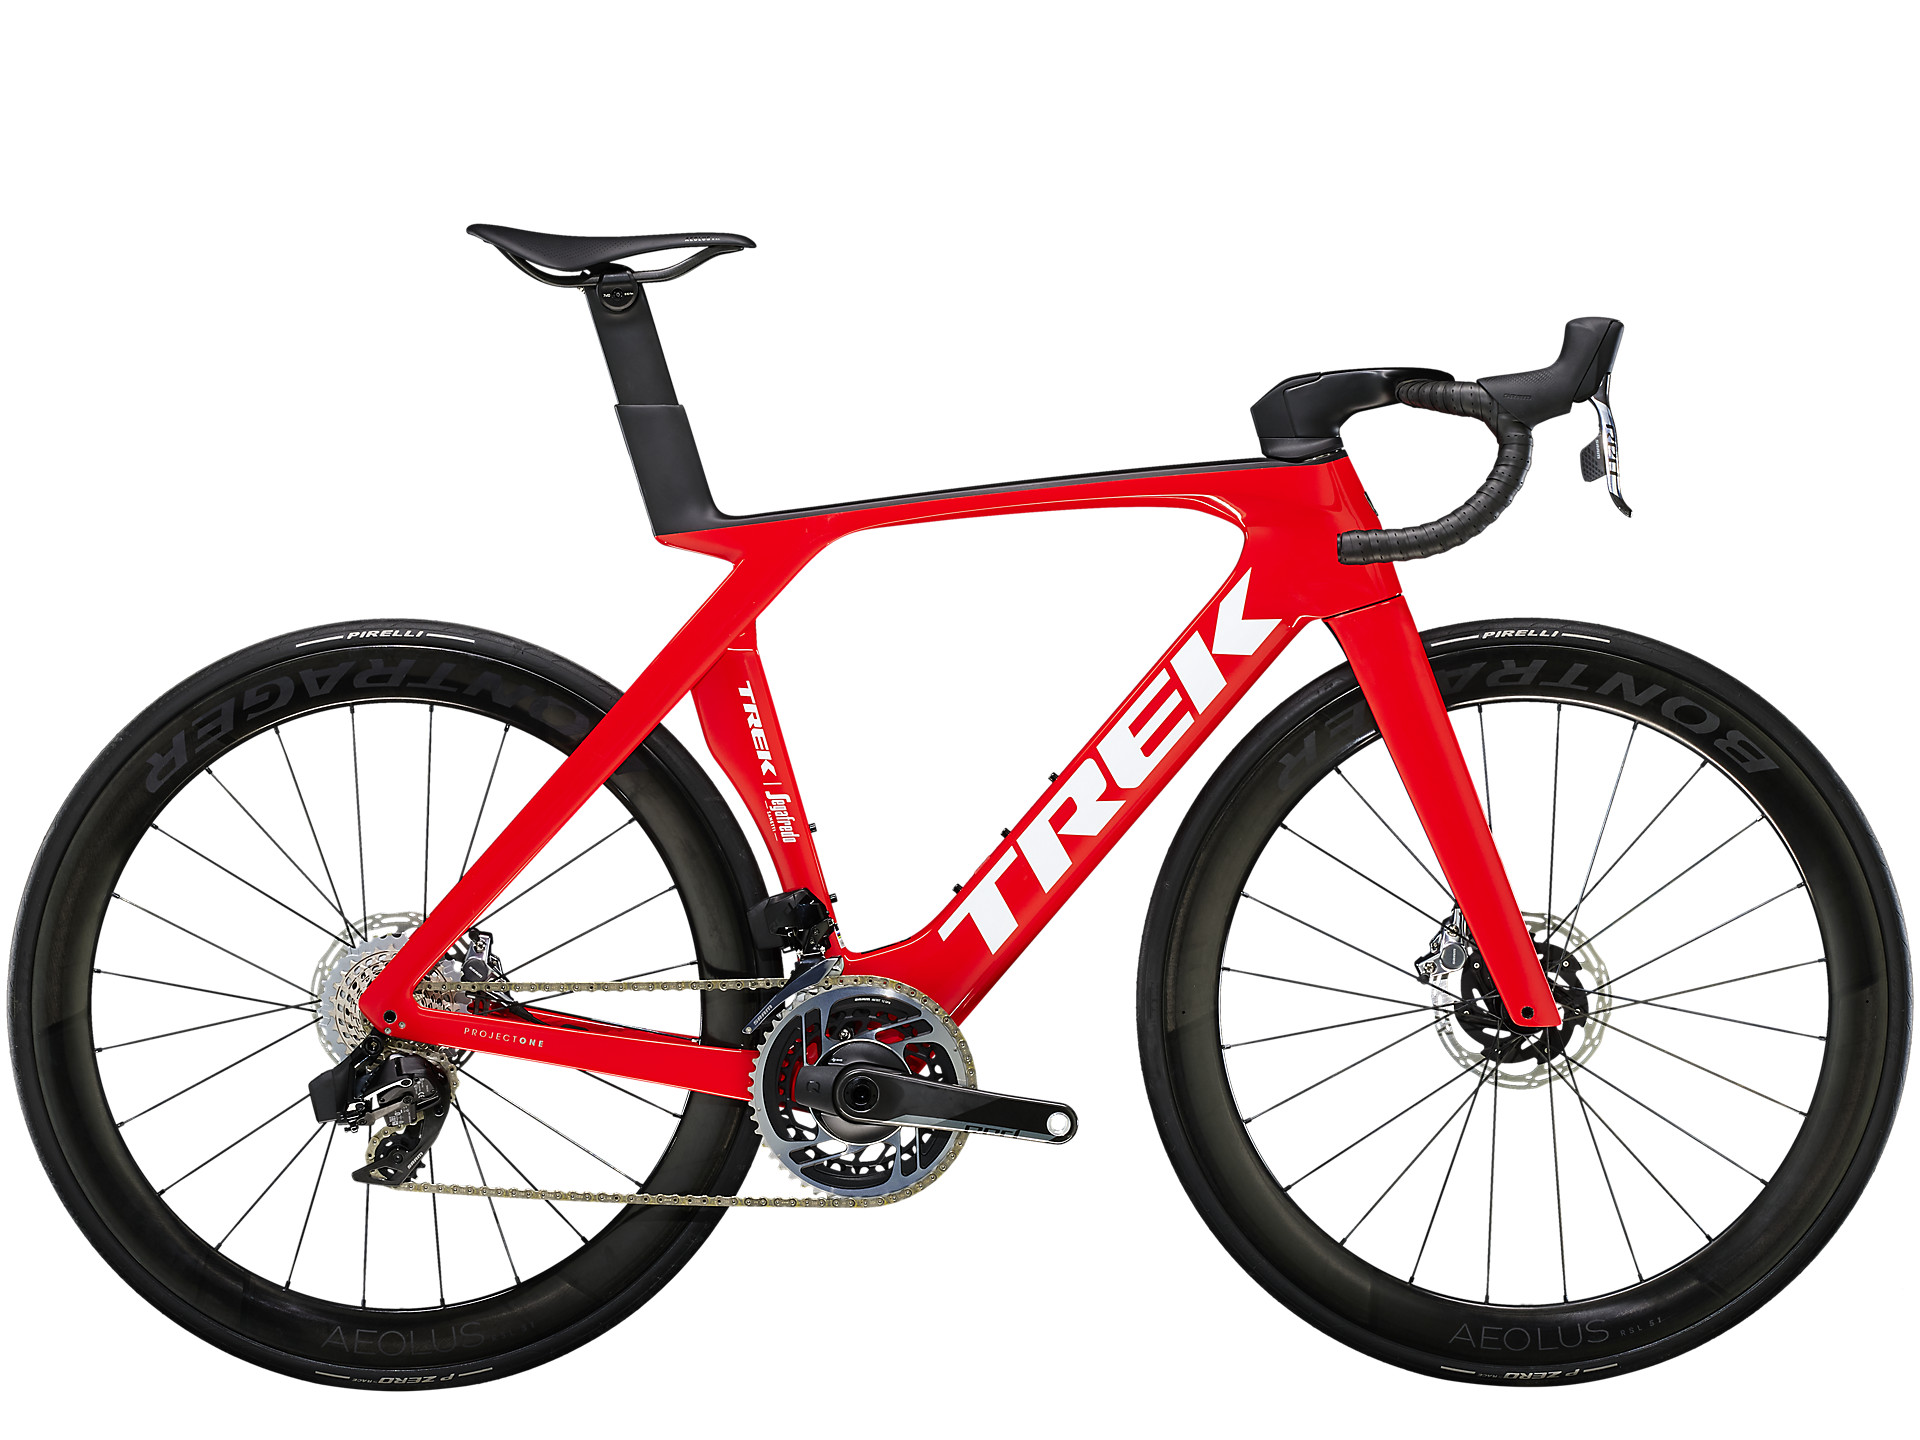 Red Trek Madone SLR 9 with SRAM RED eTap AXS wireless groupset and Bontrager carbon wheels.